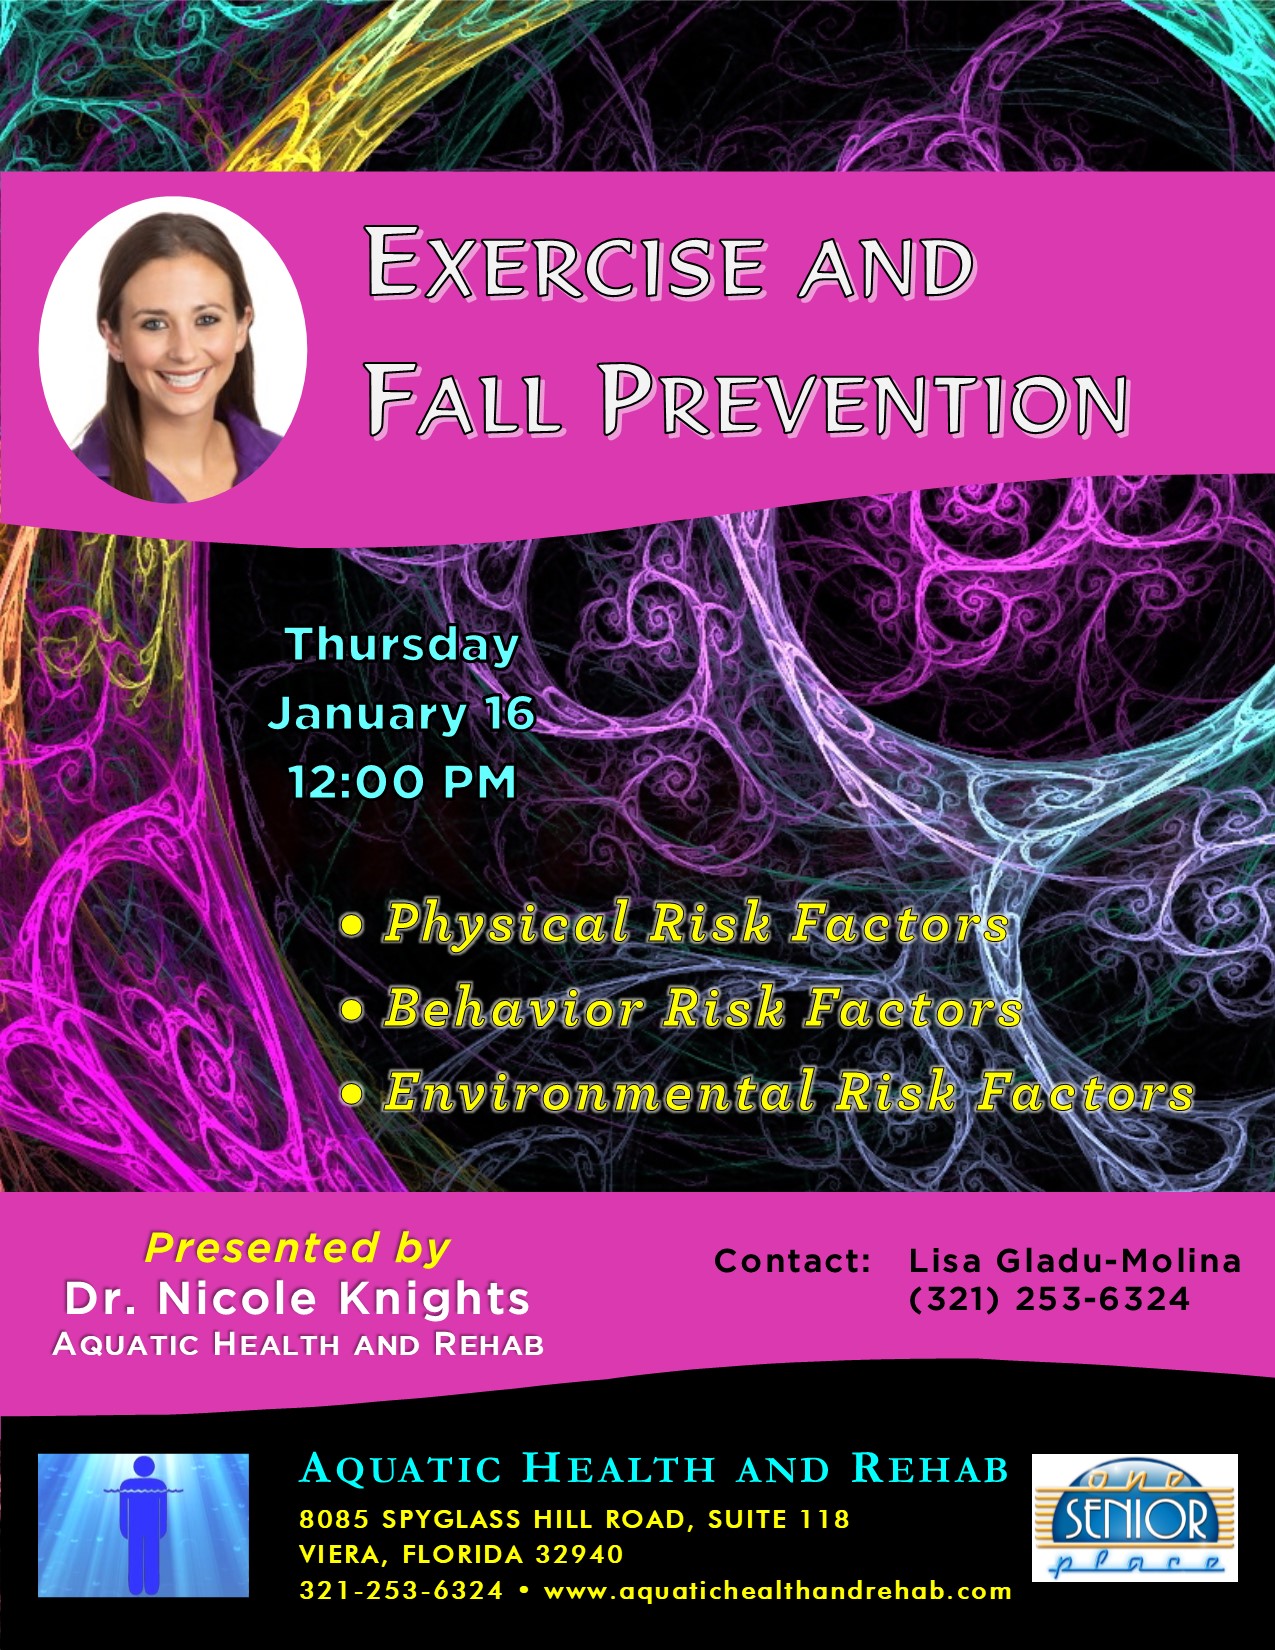 Exercise and Fall Prevention presented by Aquatic Health and Rehab